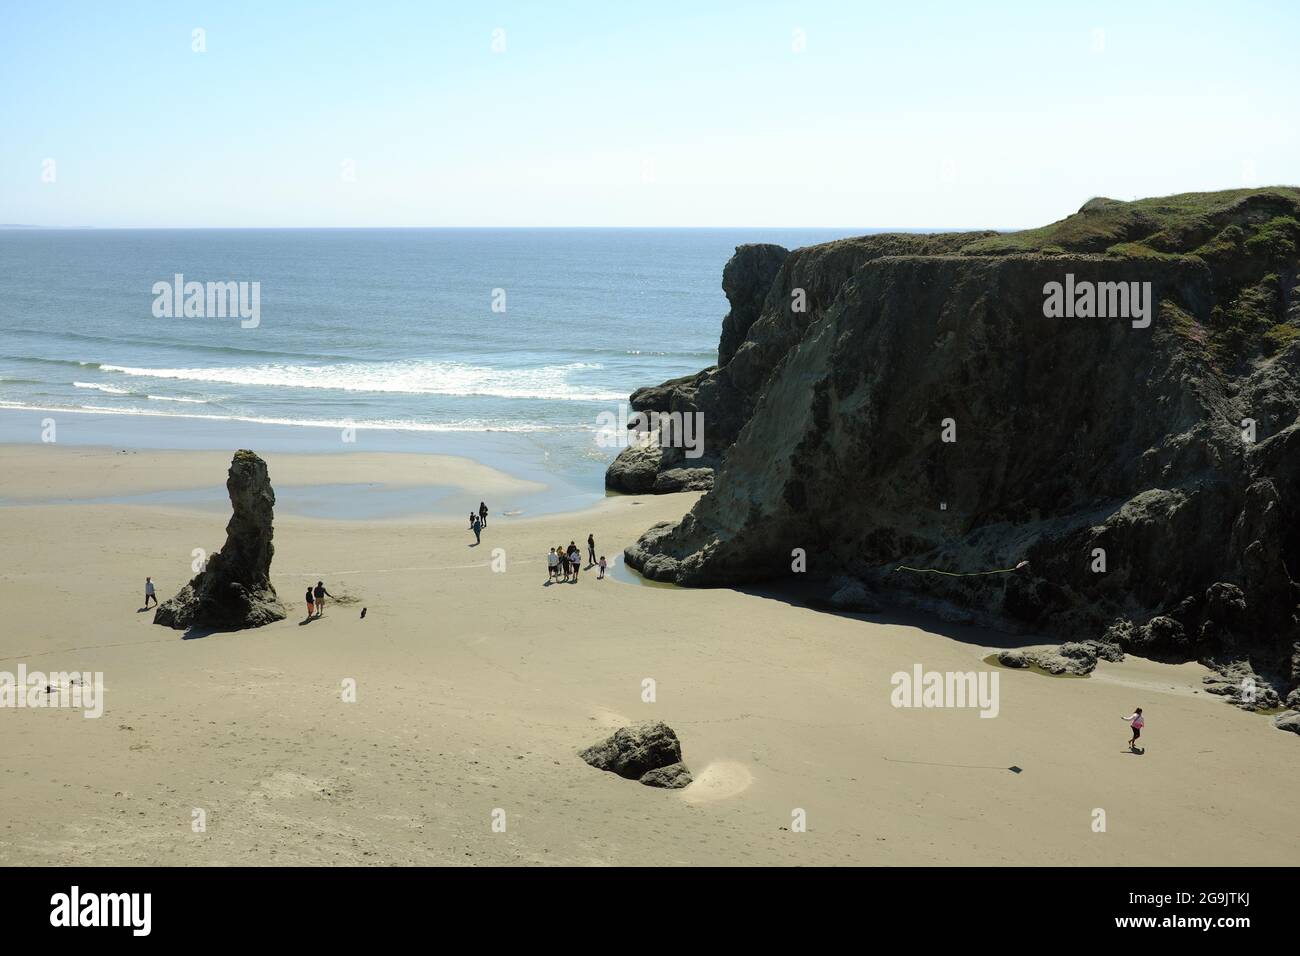 People enjoying the beach as seen from Face Rock State Scenic Viewpoint in Bandon, Oregon. Stock Photo